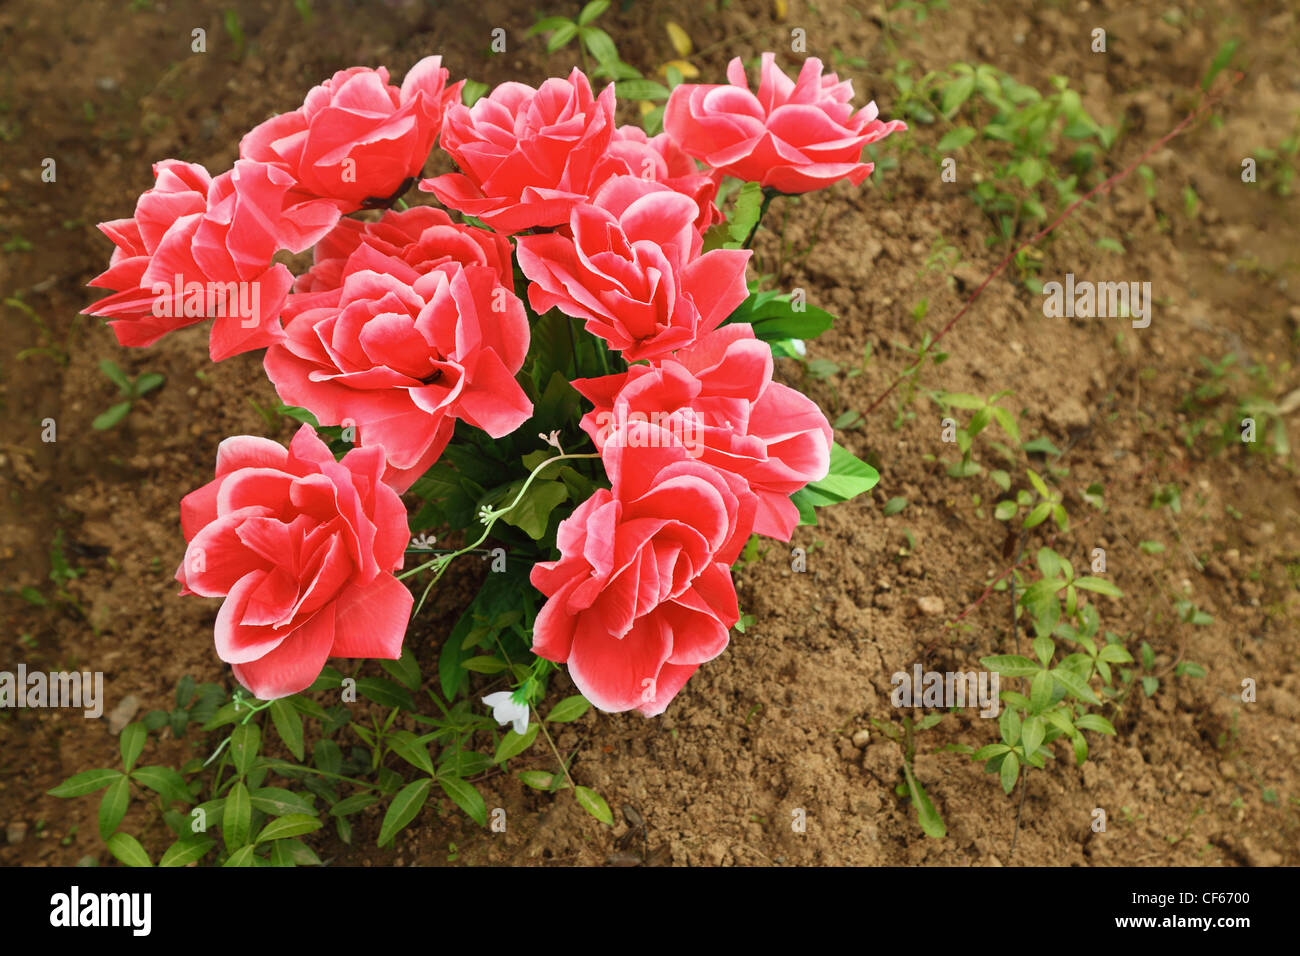 non-natural bouquet of red roses in ground on grave, plants Stock Photo